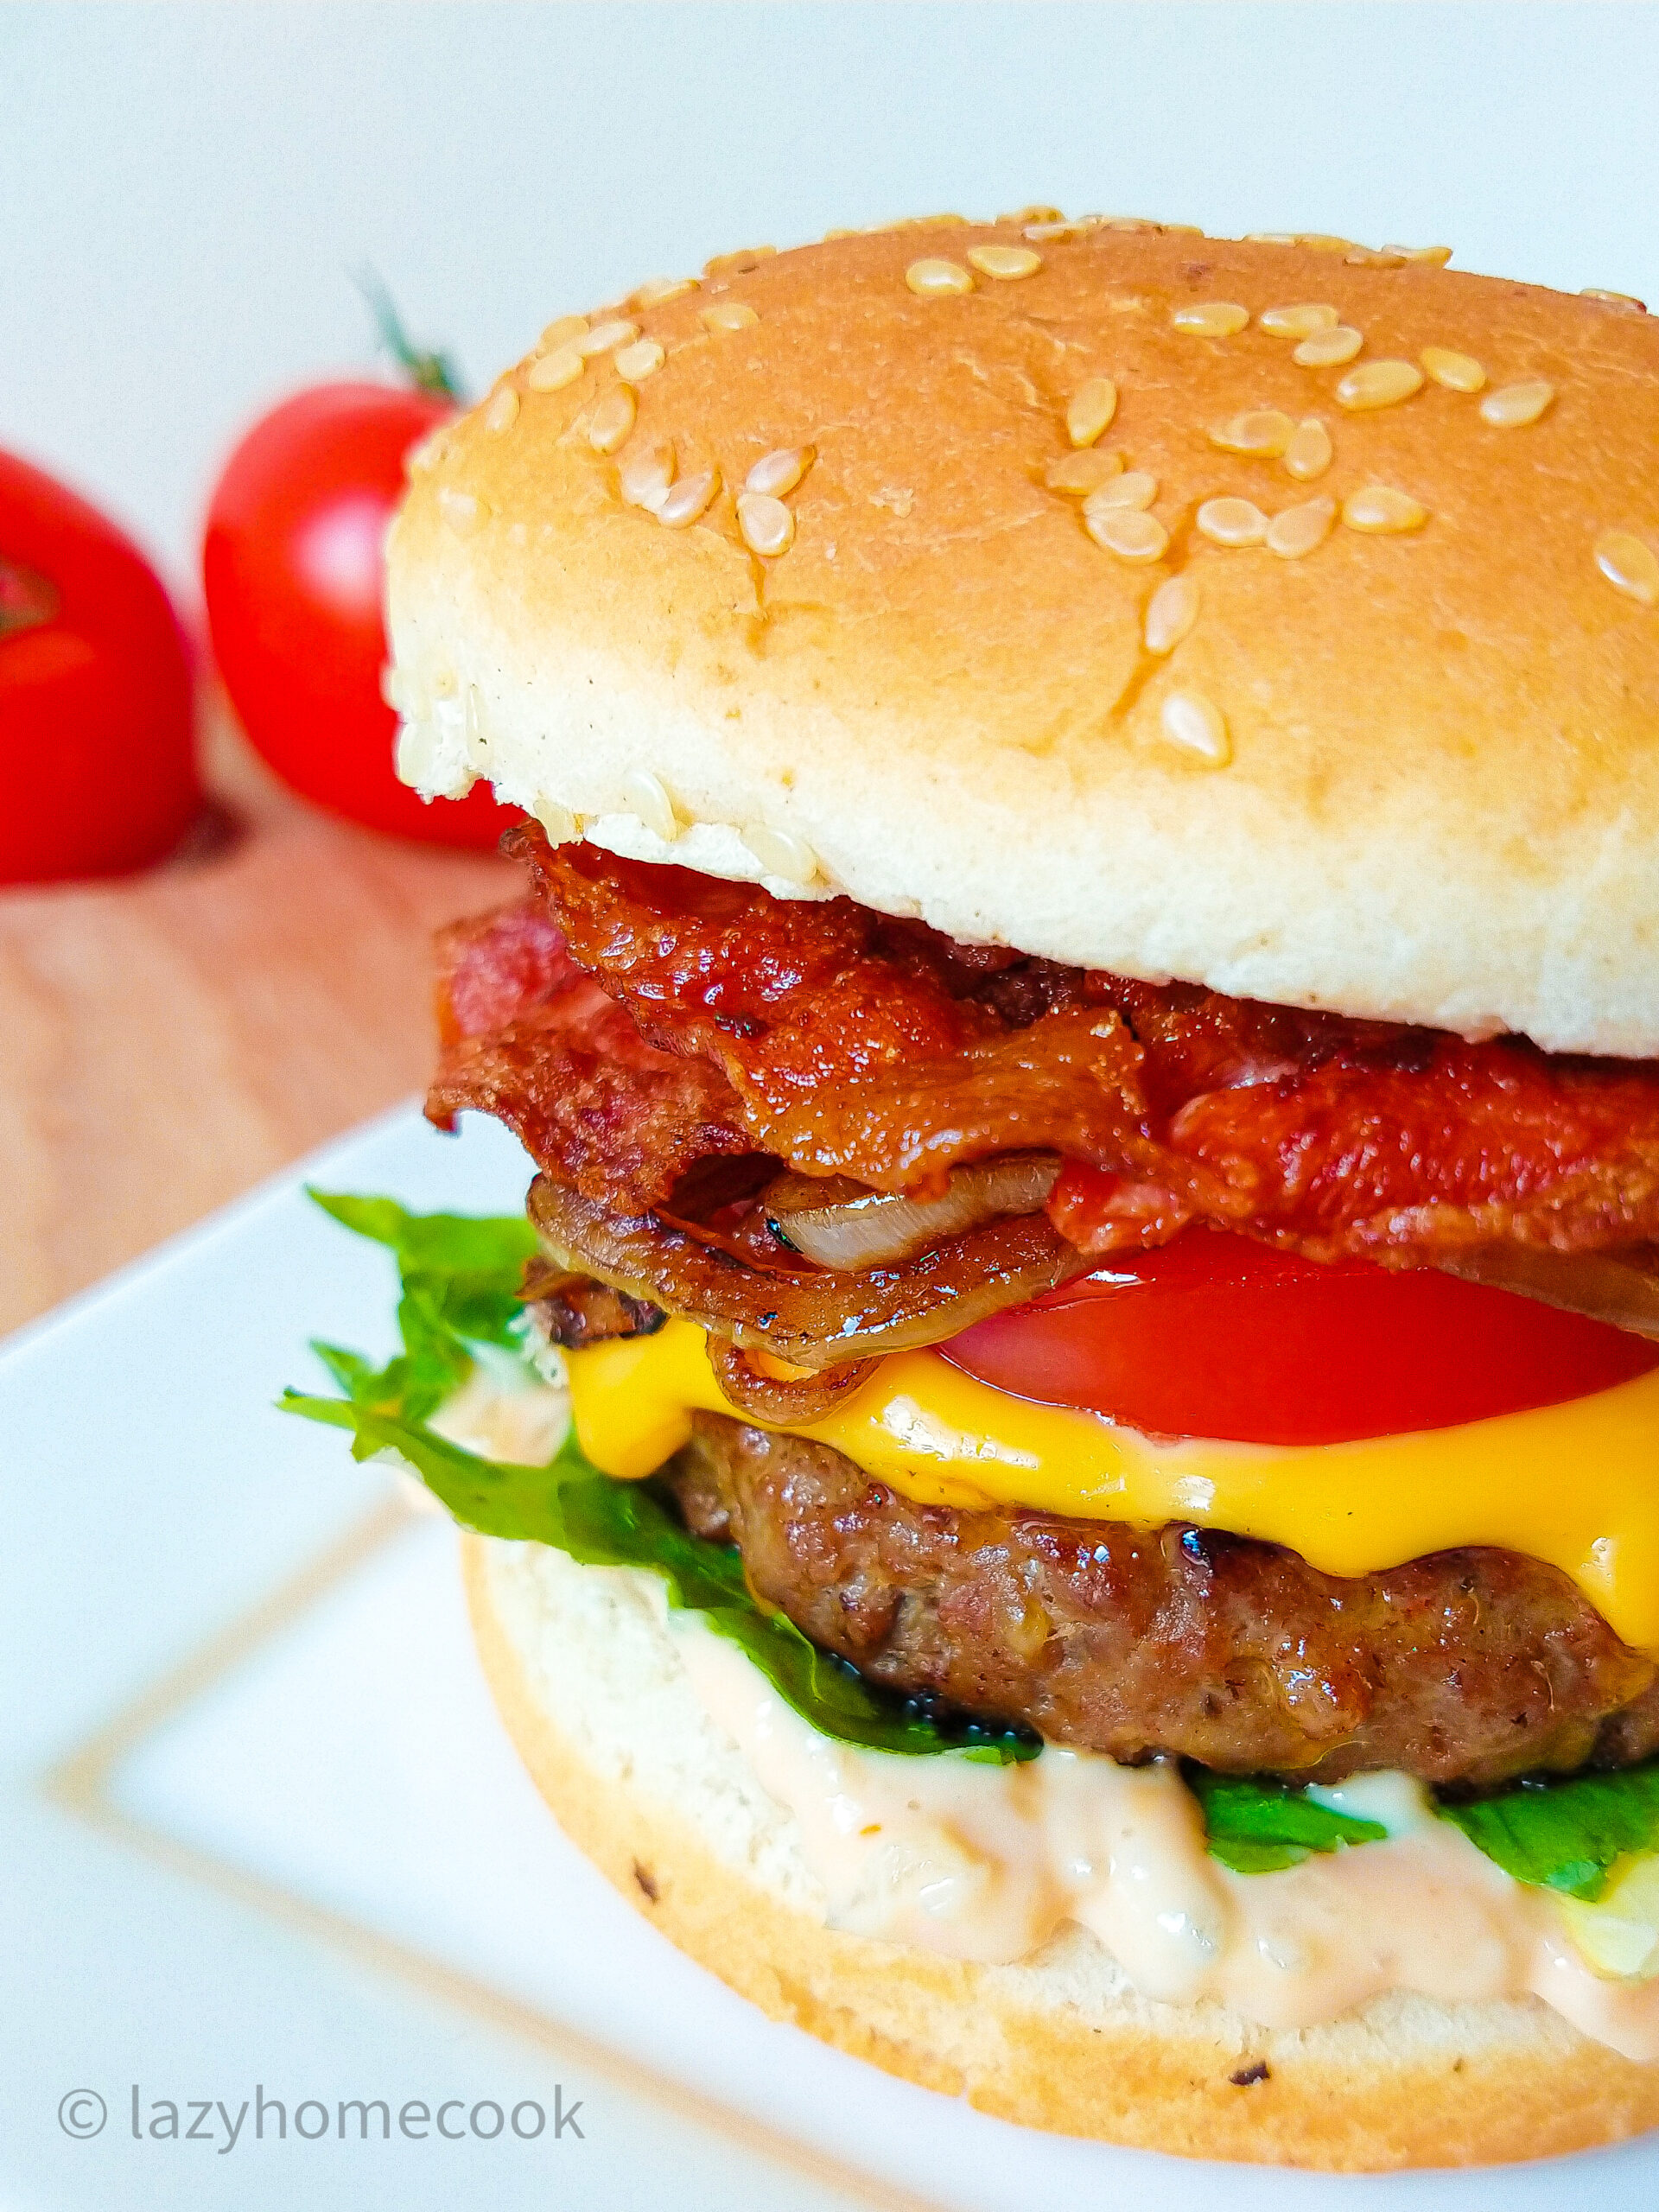 Juicy burger with crispy bacon and homemade sauce